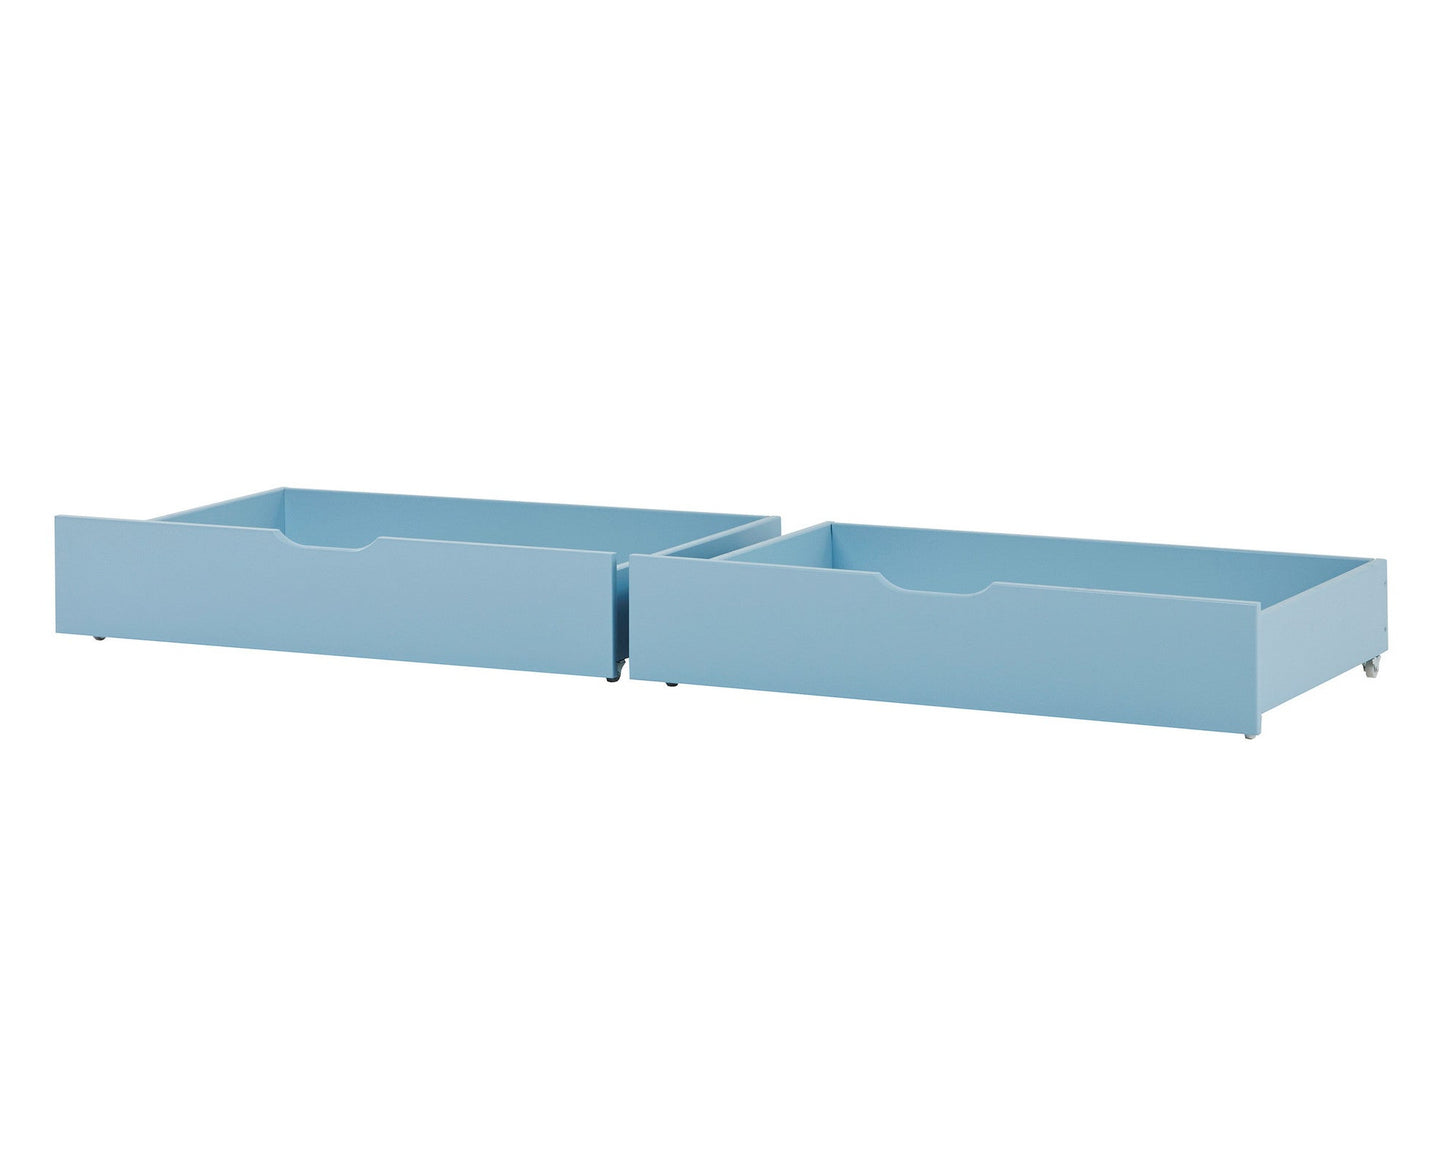 Drawer set for 90x200 cm beds